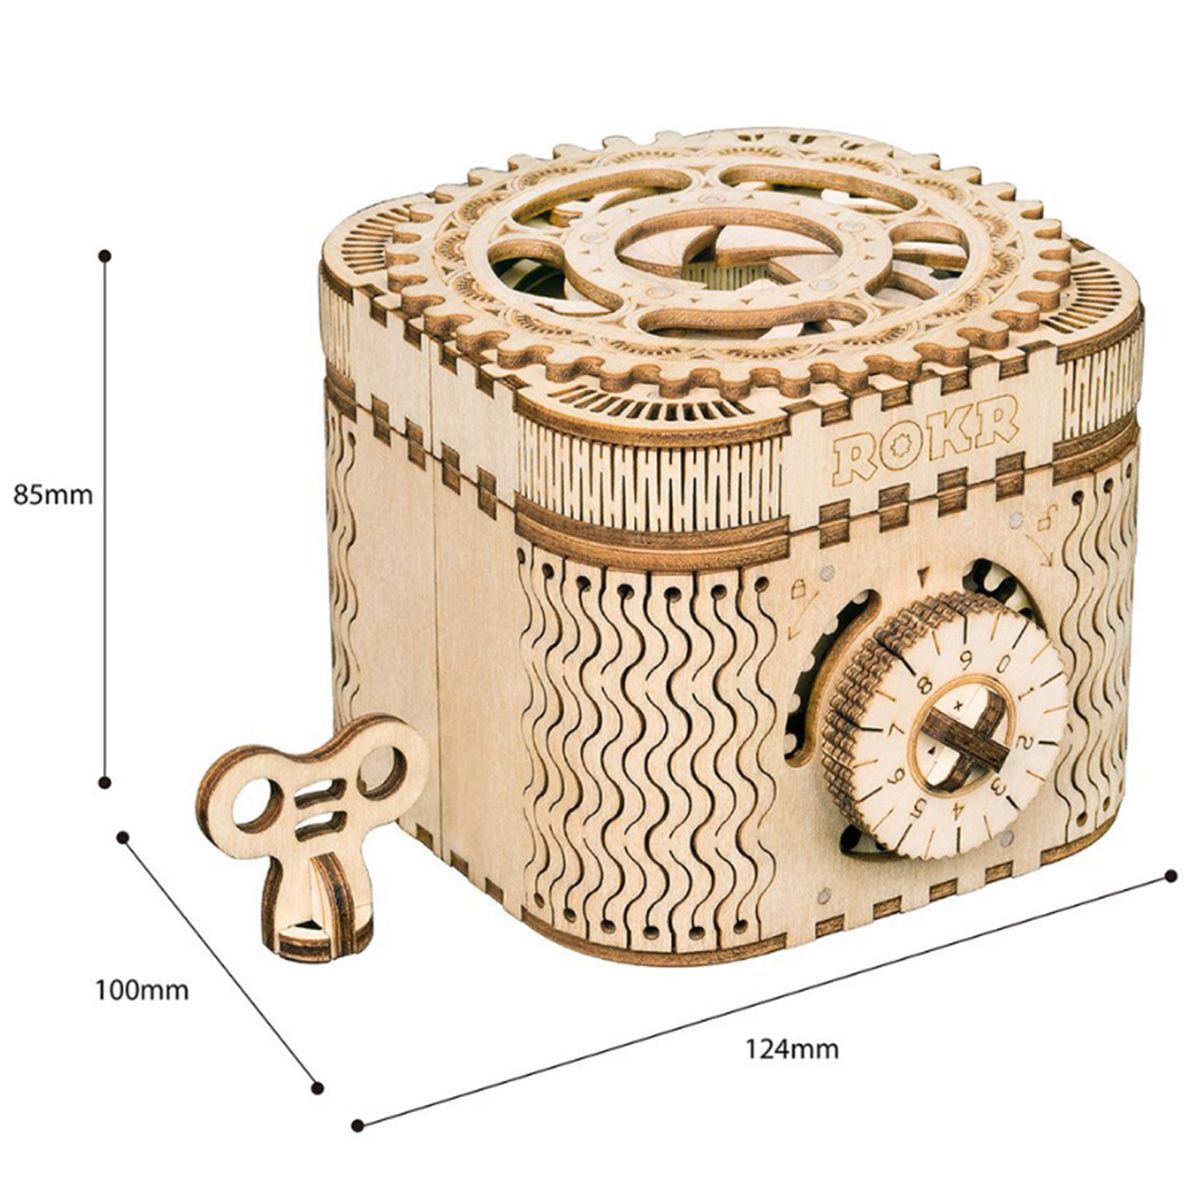 3D-Self-Assembly-Wooden-Treasure-Box-Mechanical-Gears-Building-Kits-Puzzle-Building-Model-Gift-1447057